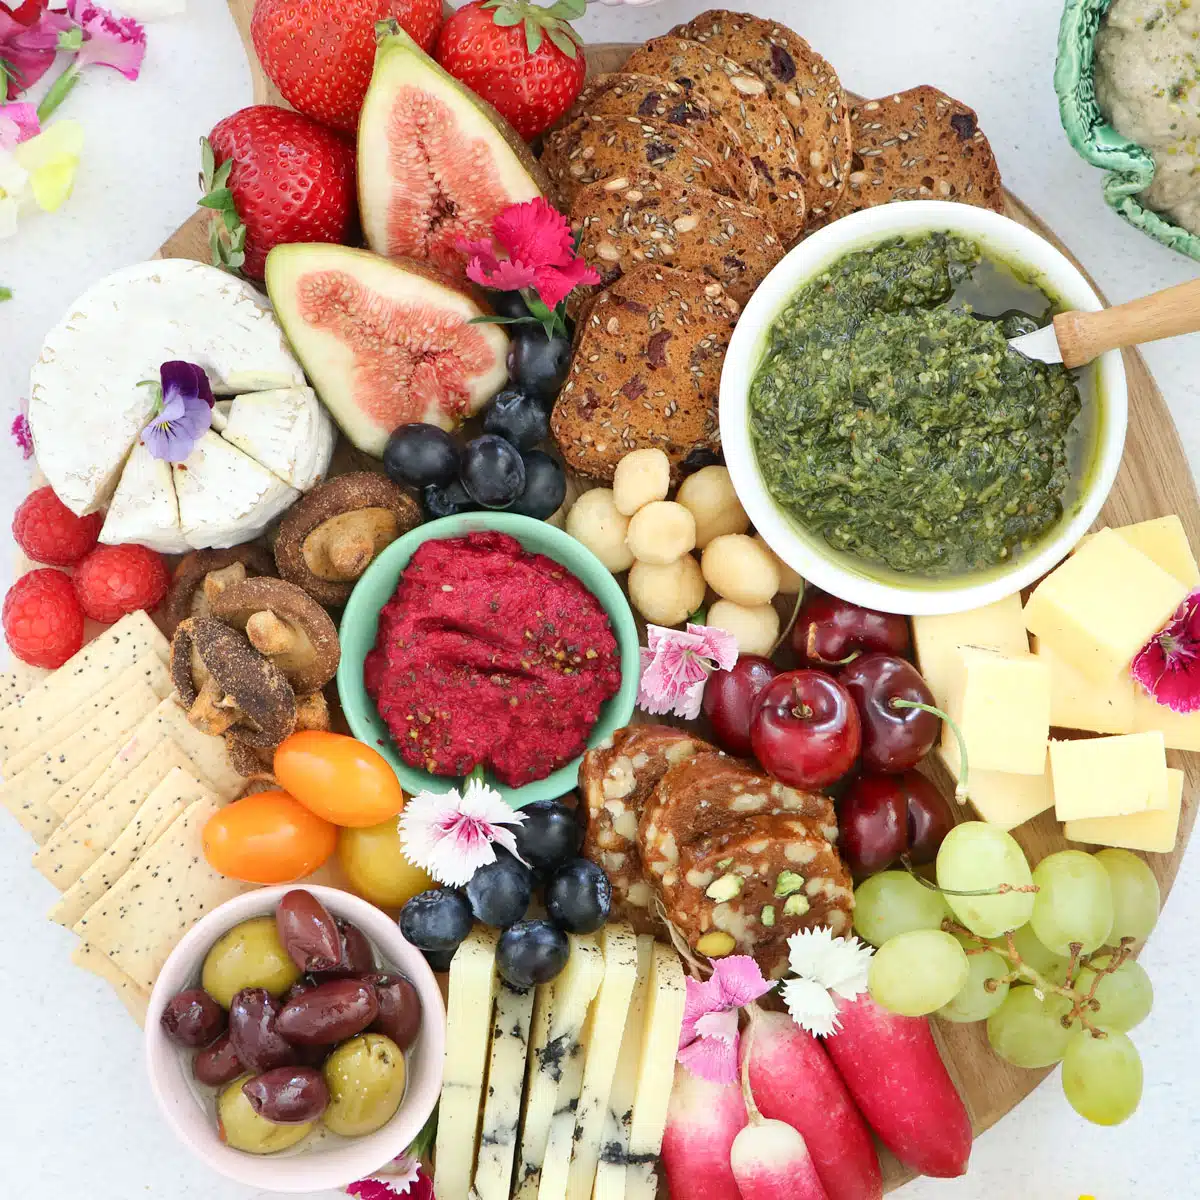 Looking down over a round grazing board filled with an assortment of colourful ingredients.